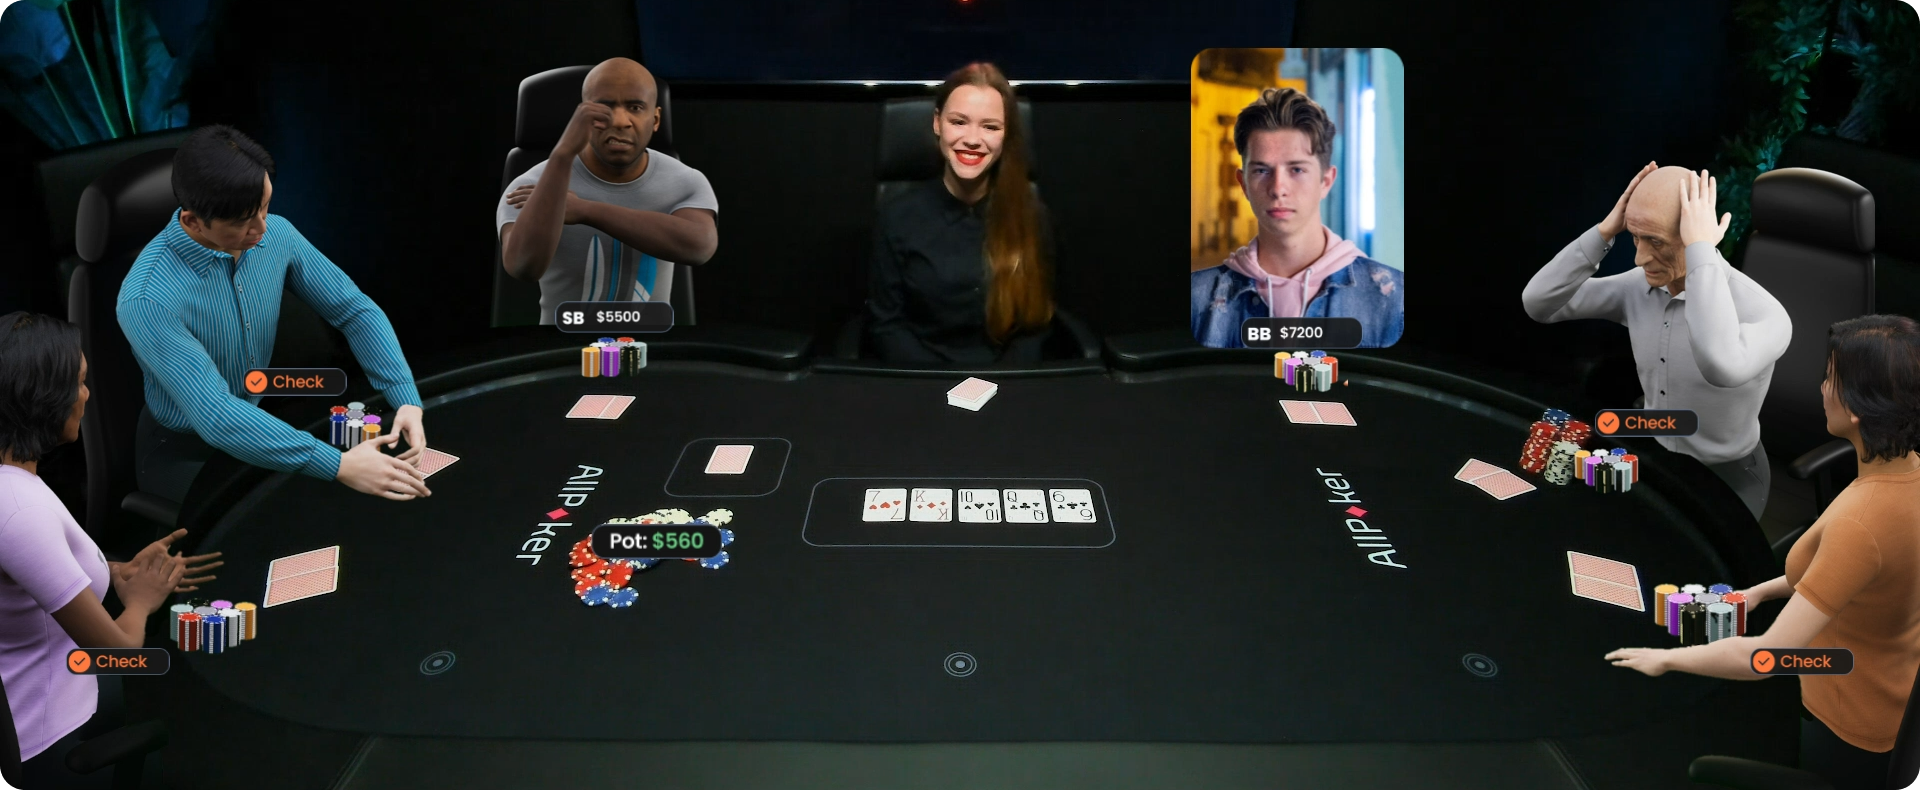 AllPoker live game screenshot with live dealer and animated user charaters